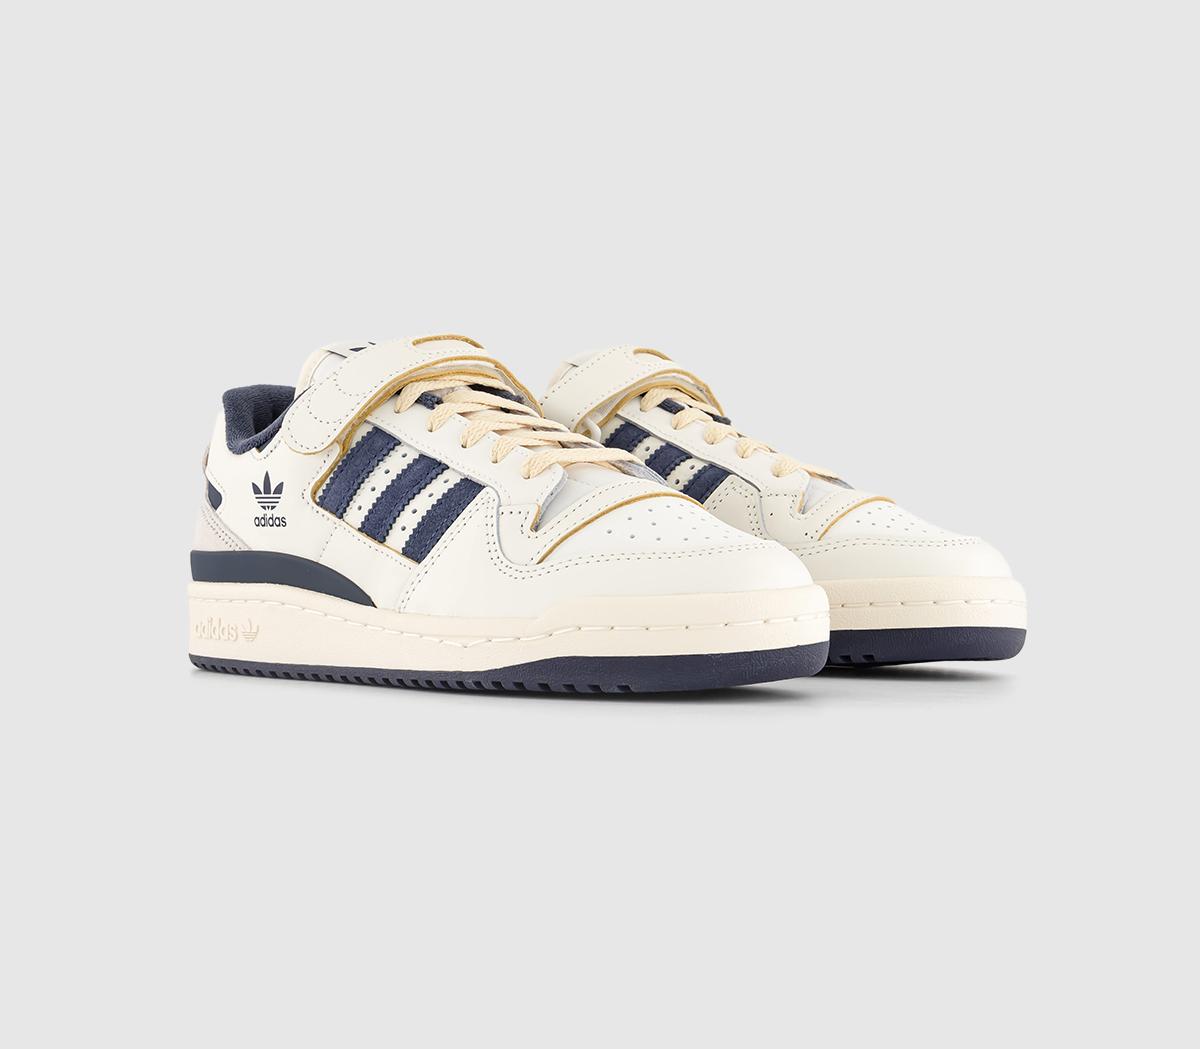 Adidas Womens Forum 84 Low Trainers Offwhite Shadow Navy Cream White, 4